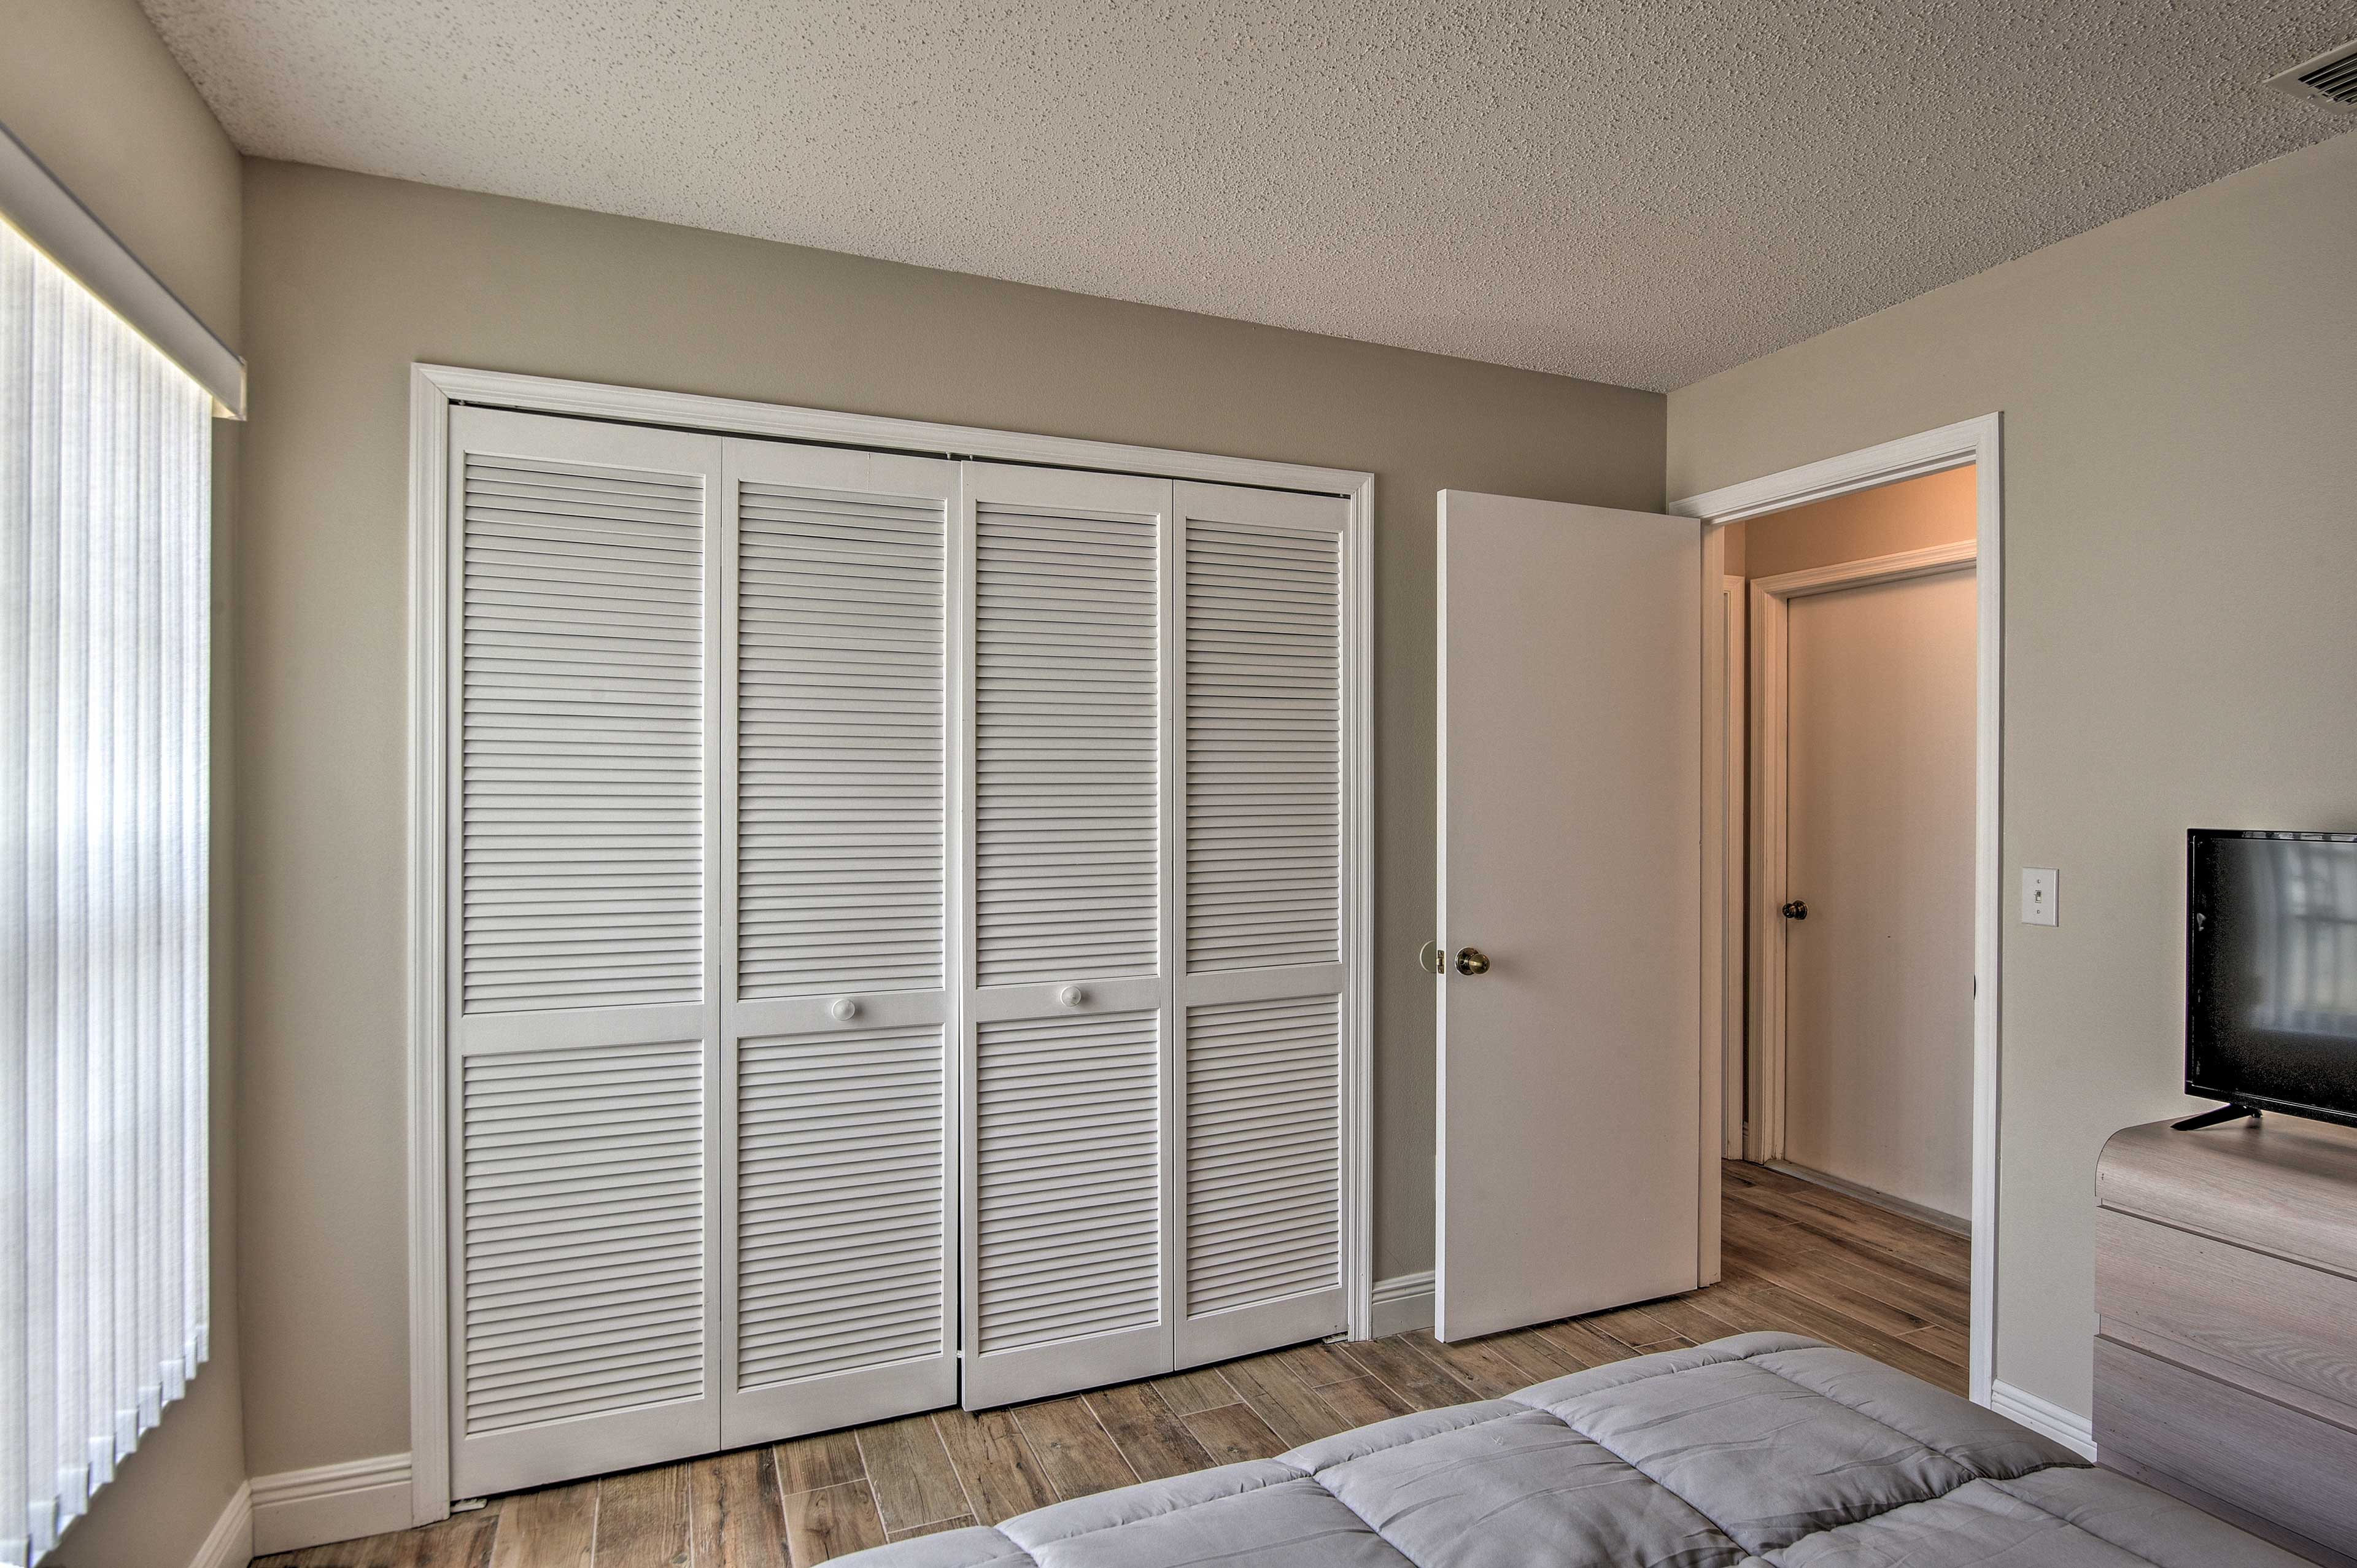 A full bed and double closets complete the room.